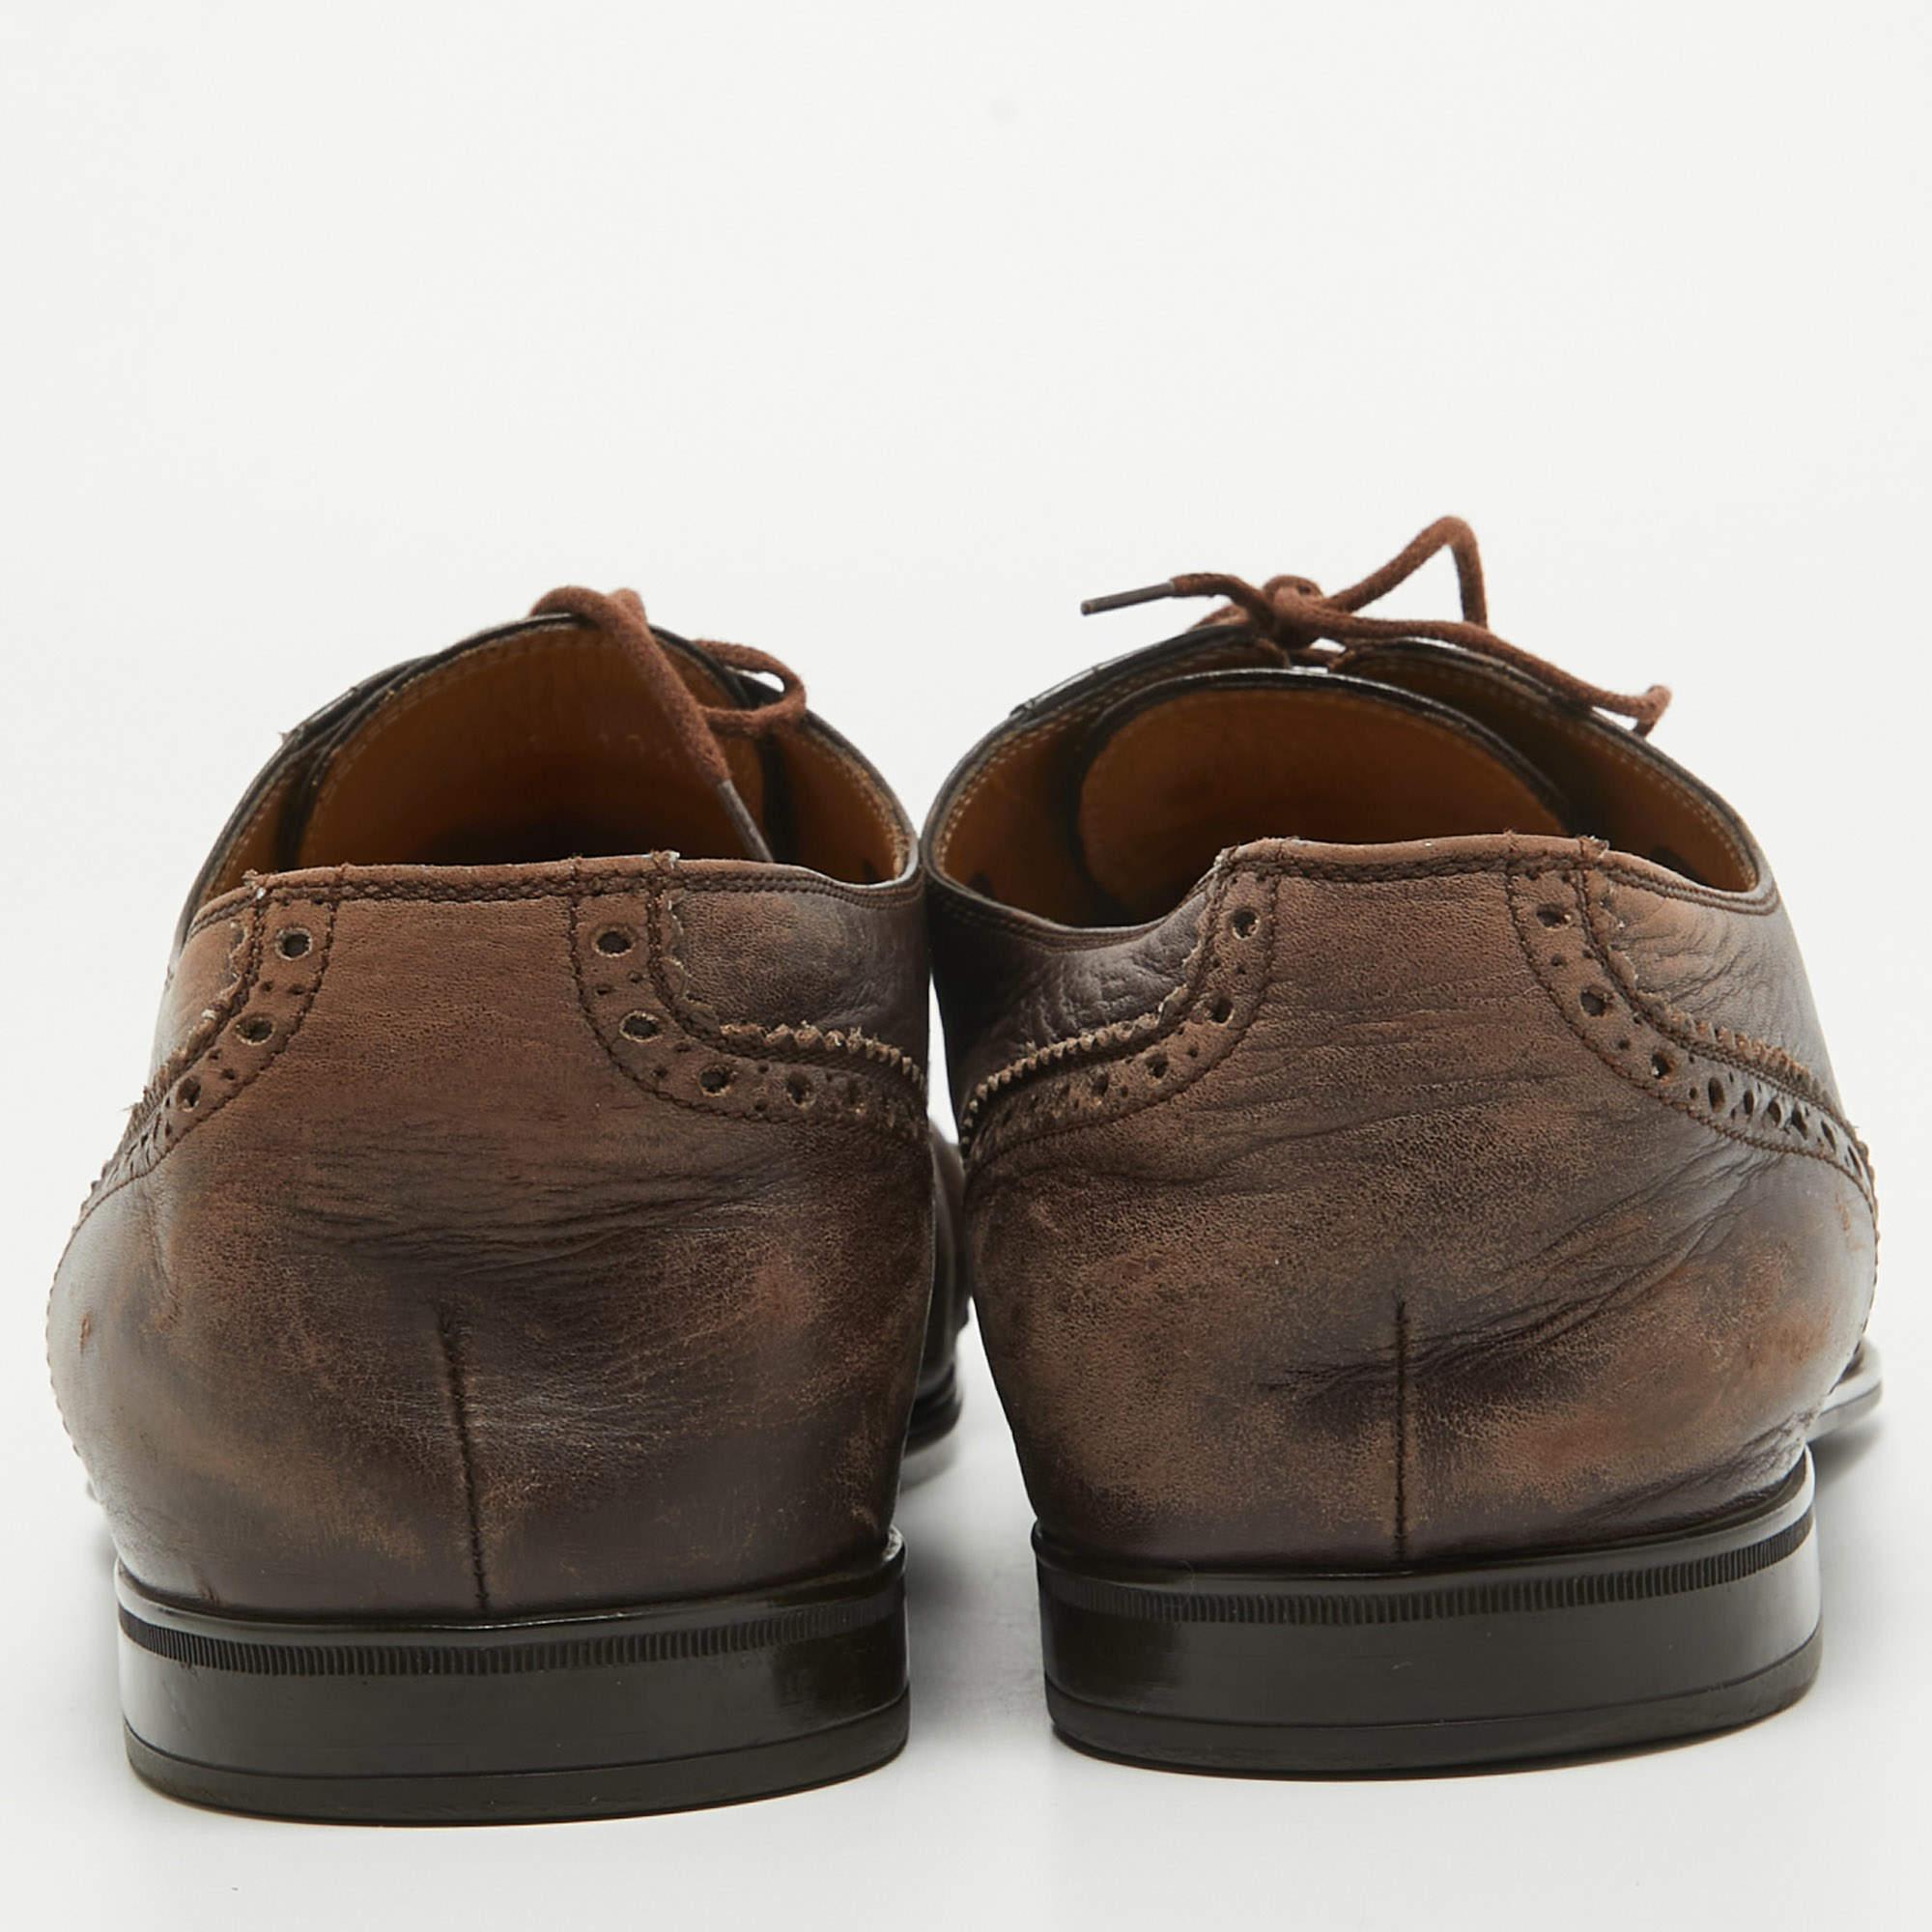 Gucci Brown Leather Lace Up Brogue Oxfords Size 44.5 For Sale 1